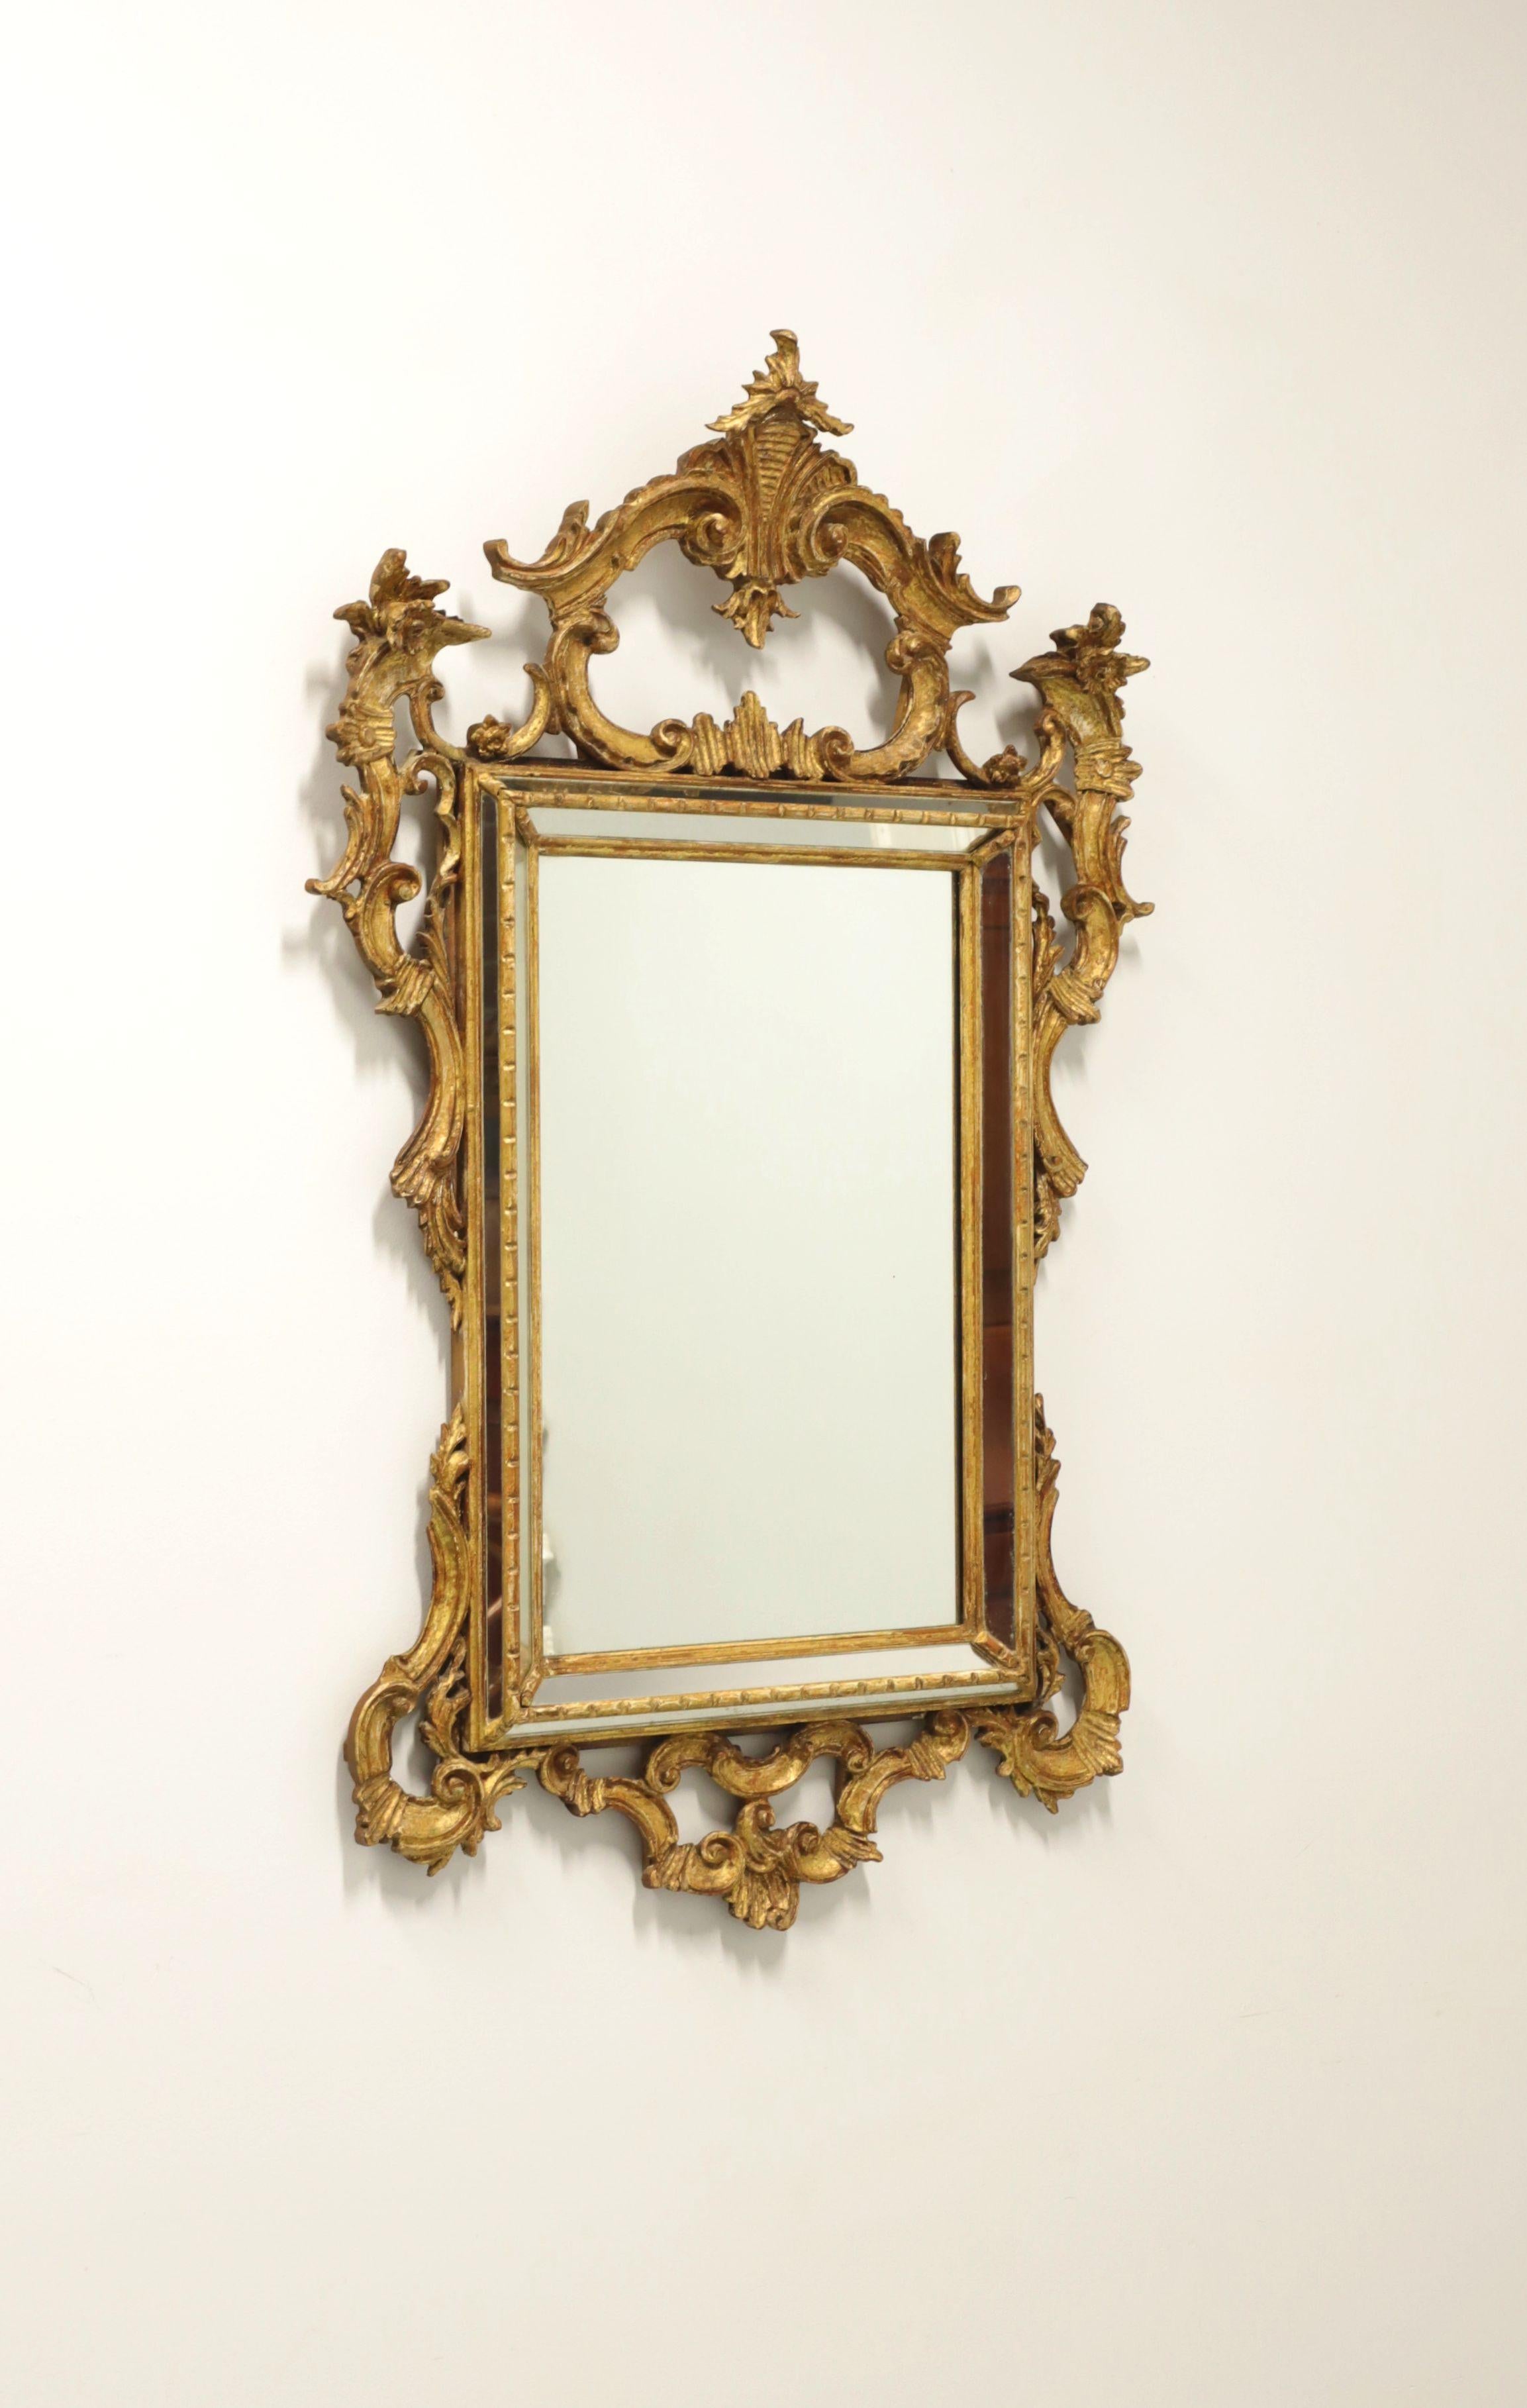 A parclose wall mirror in the French Louis XV Rococo style by Labarge. Mirror glass in an intricately carved gold gilt painted wood frame with strips of mirrors surrounding the outer edges. Features crest to top, botanic accents and scrollwork